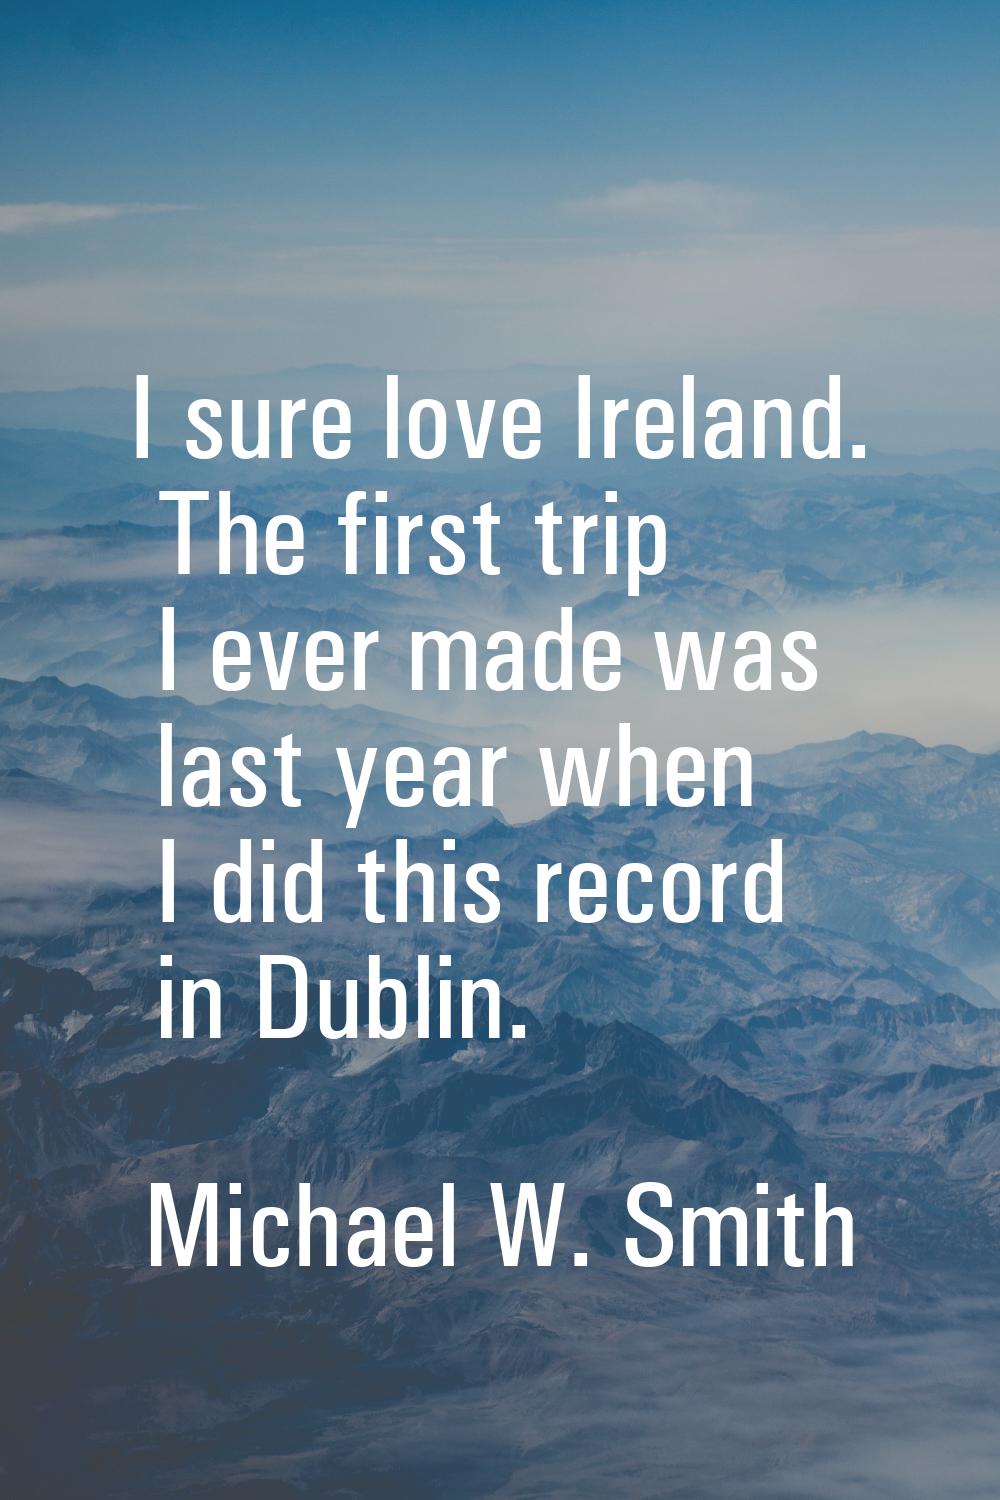 I sure love Ireland. The first trip I ever made was last year when I did this record in Dublin.